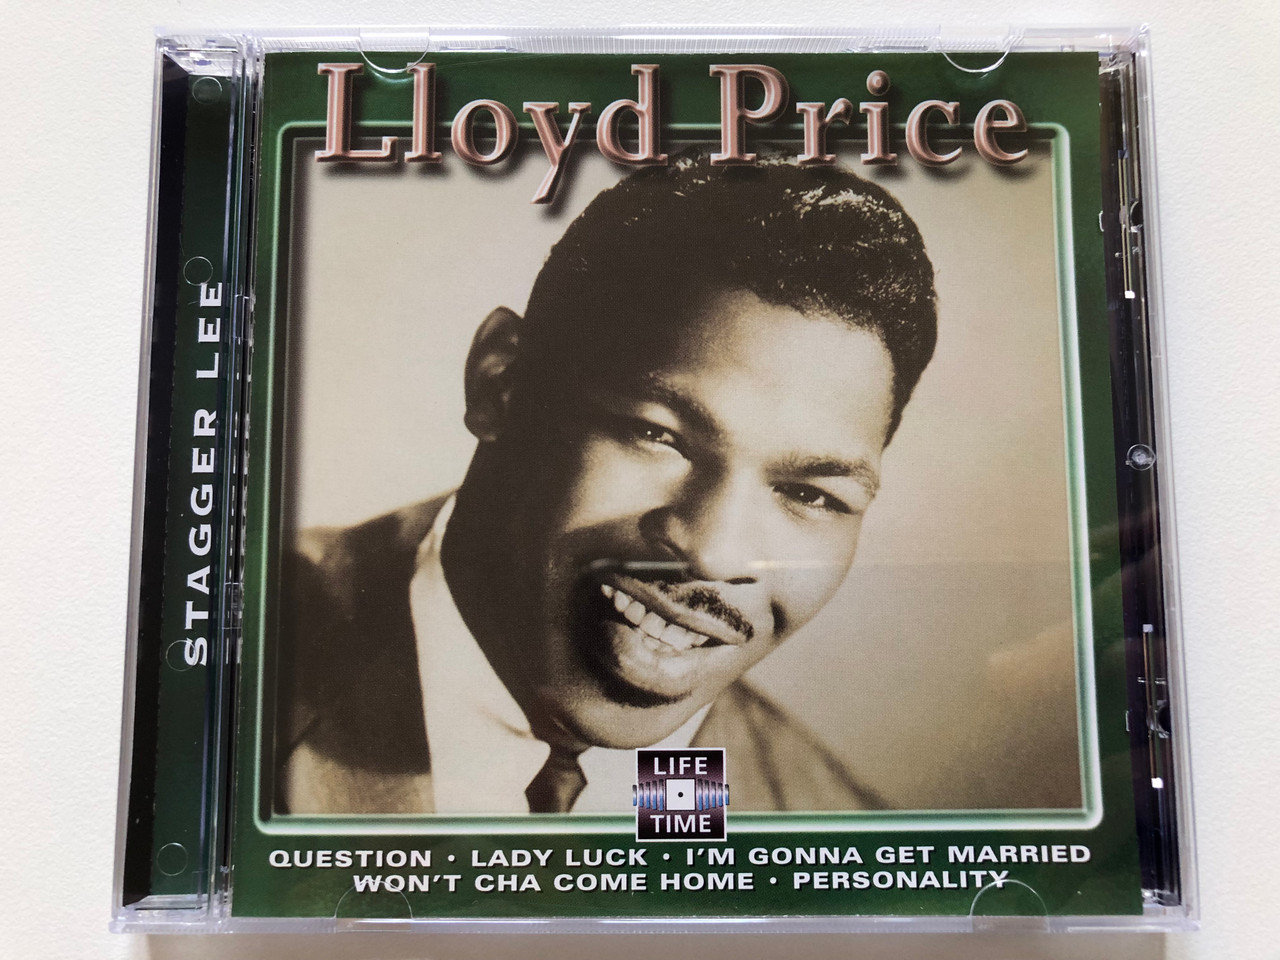 Lloyd Price – Stagger Lee / Question, Lady Luck, I'm Gonna Get Married,  Won't Cha Come Home, Personality / Life Time Audio CD / LT 5027 -  bibleinmylanguage